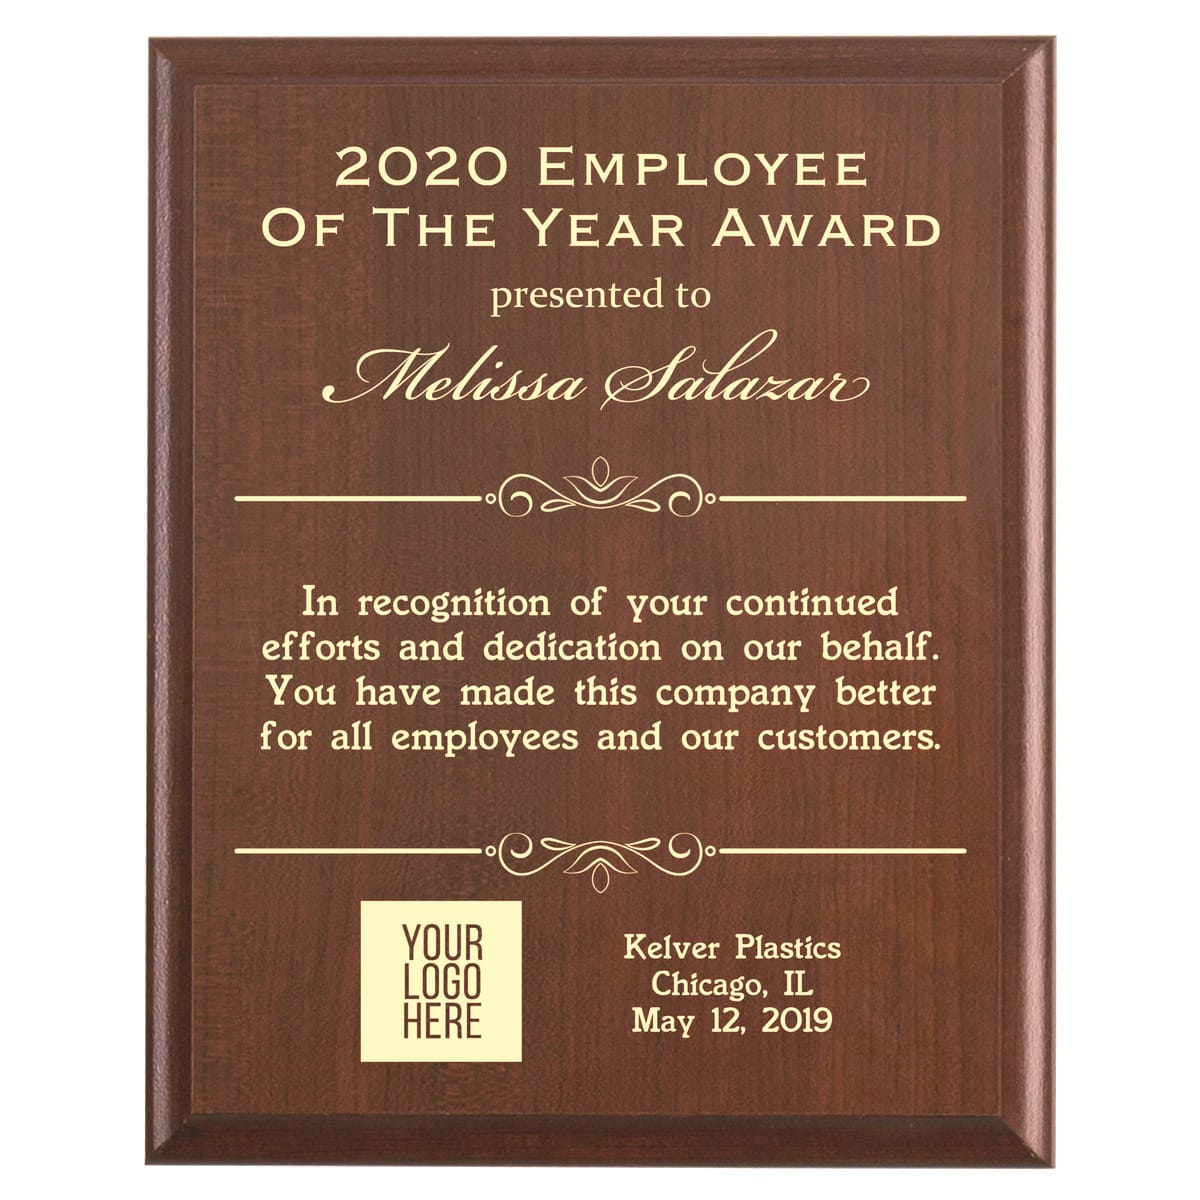 Plaque photo: Employee of the Year Award Plaque design with free personalization. Wood style finish with customized text.